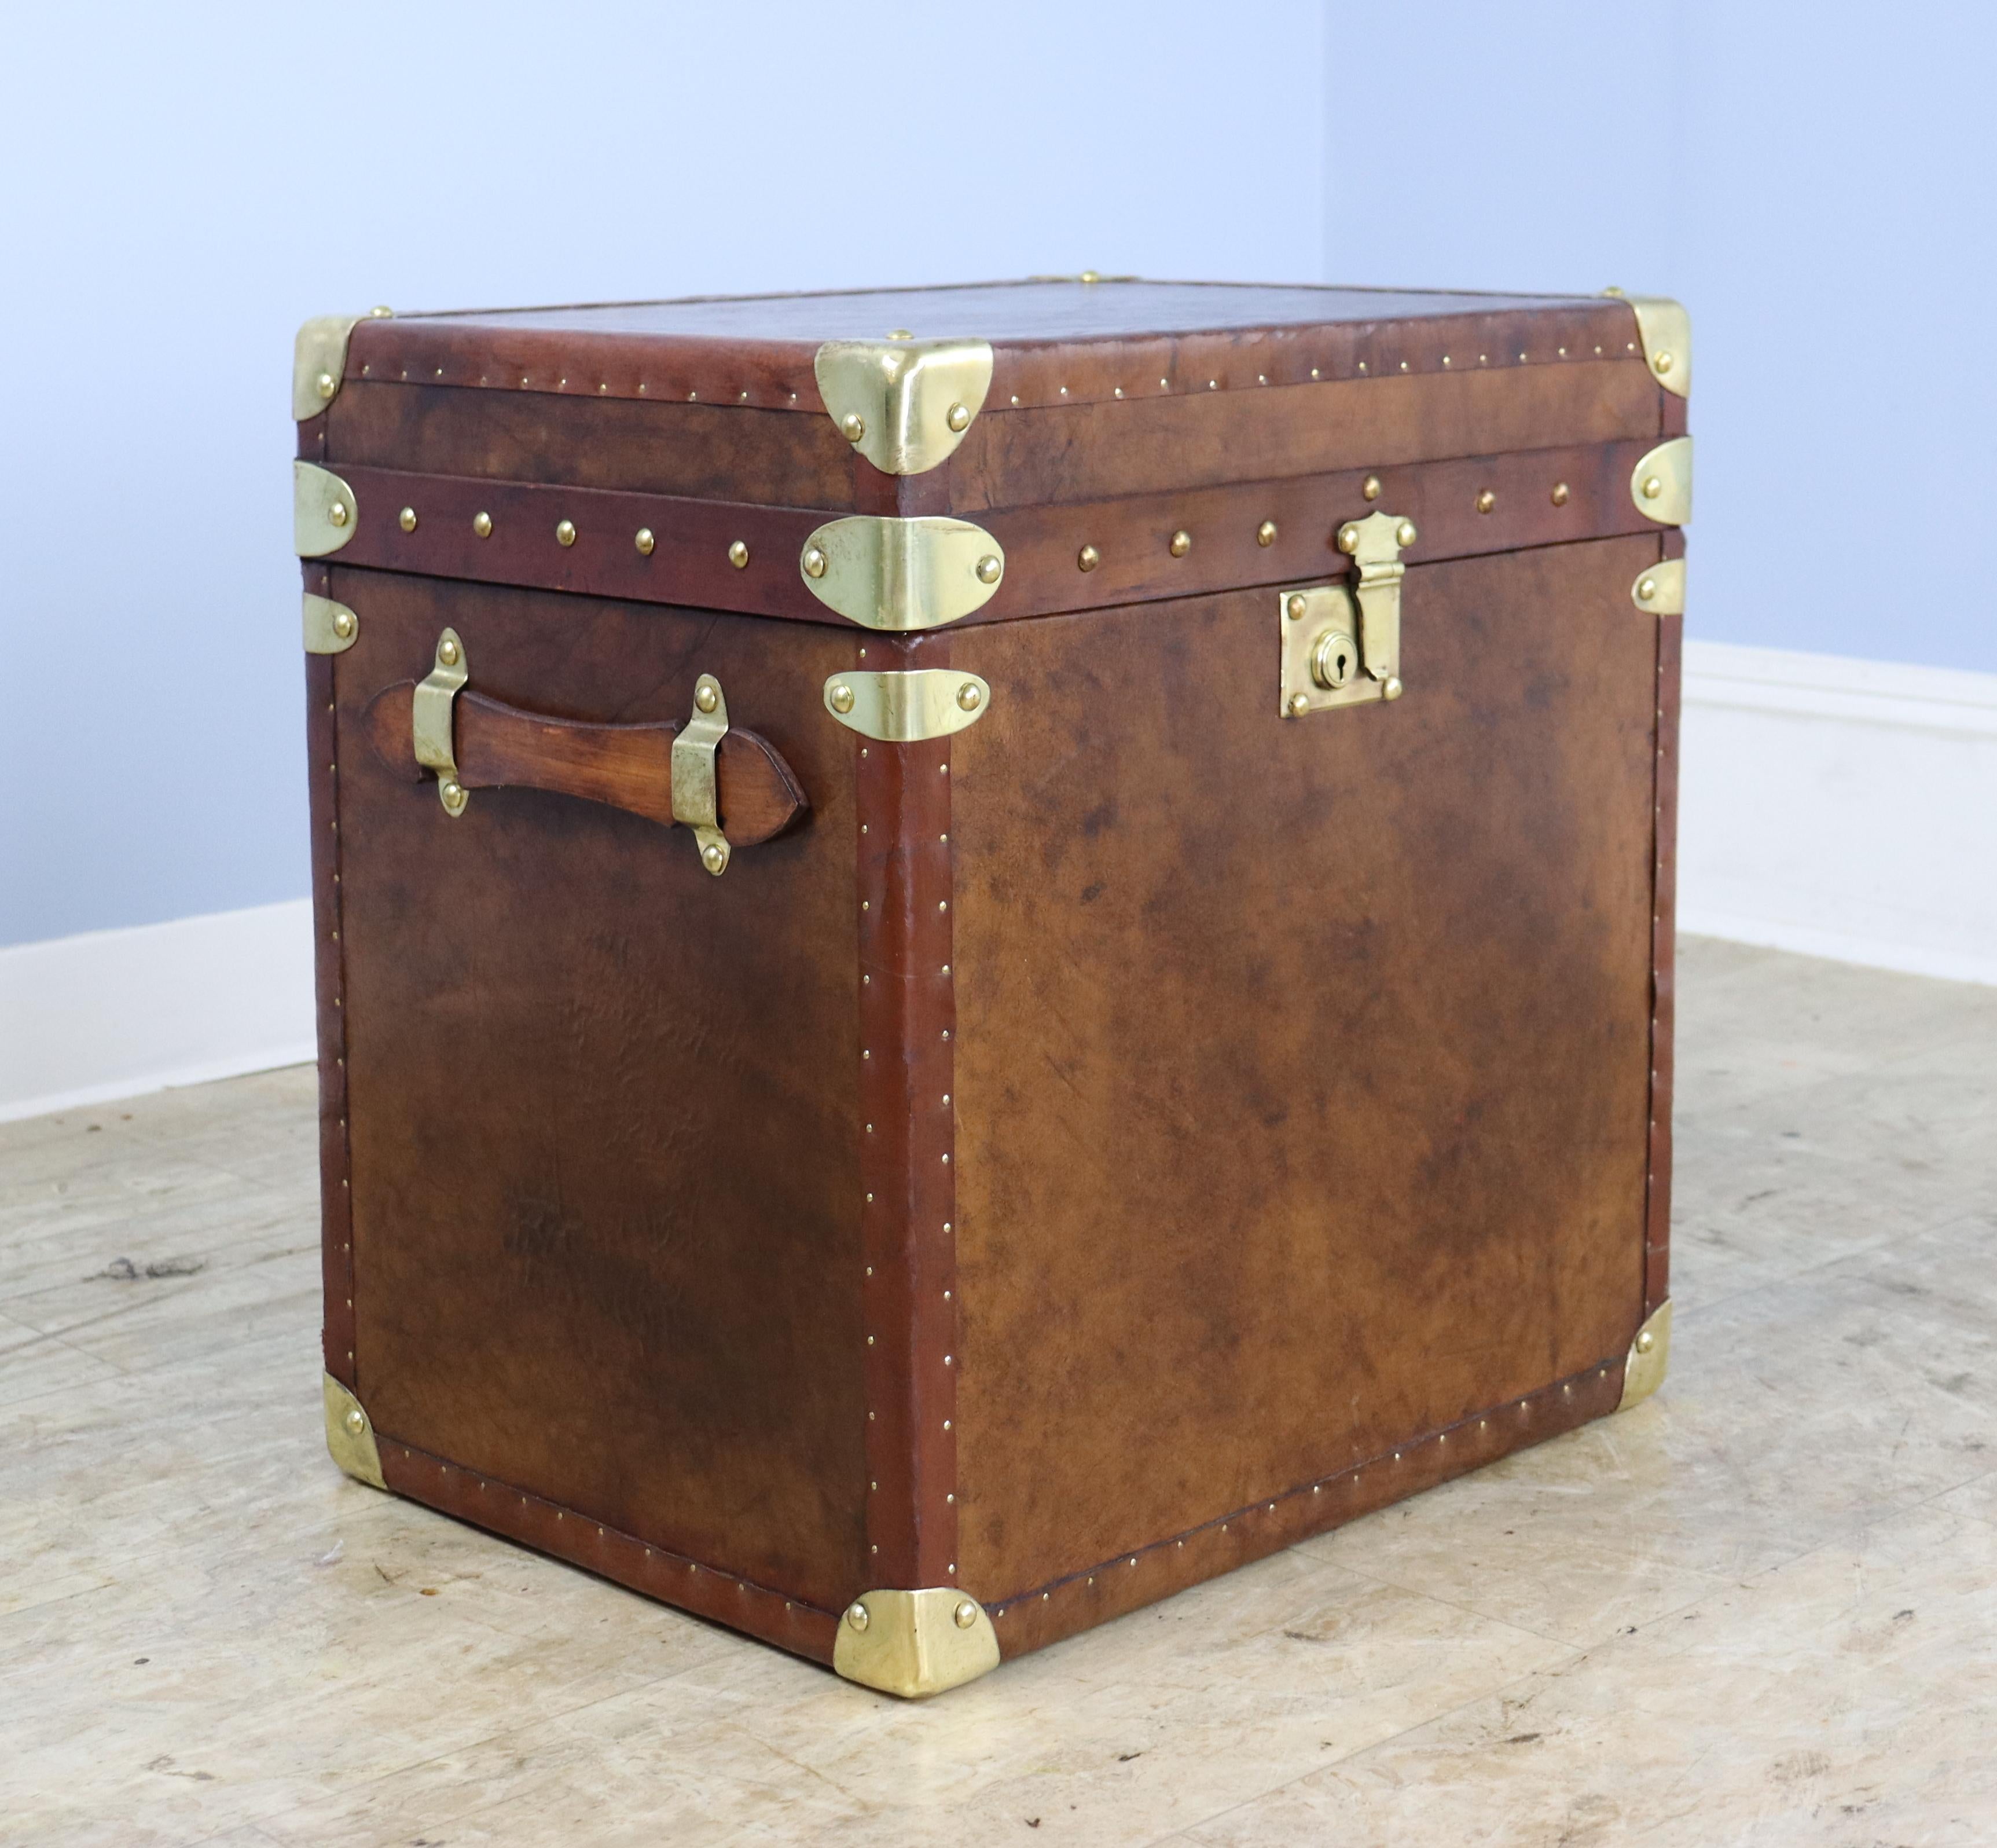 A handsome leather trunk, newly made from new leather with vintage leather trim, as we well as vintage brass detail and locks.  New dark blue fabric interior is clean and complements the look of the exterior.  Great for storage but also would make a